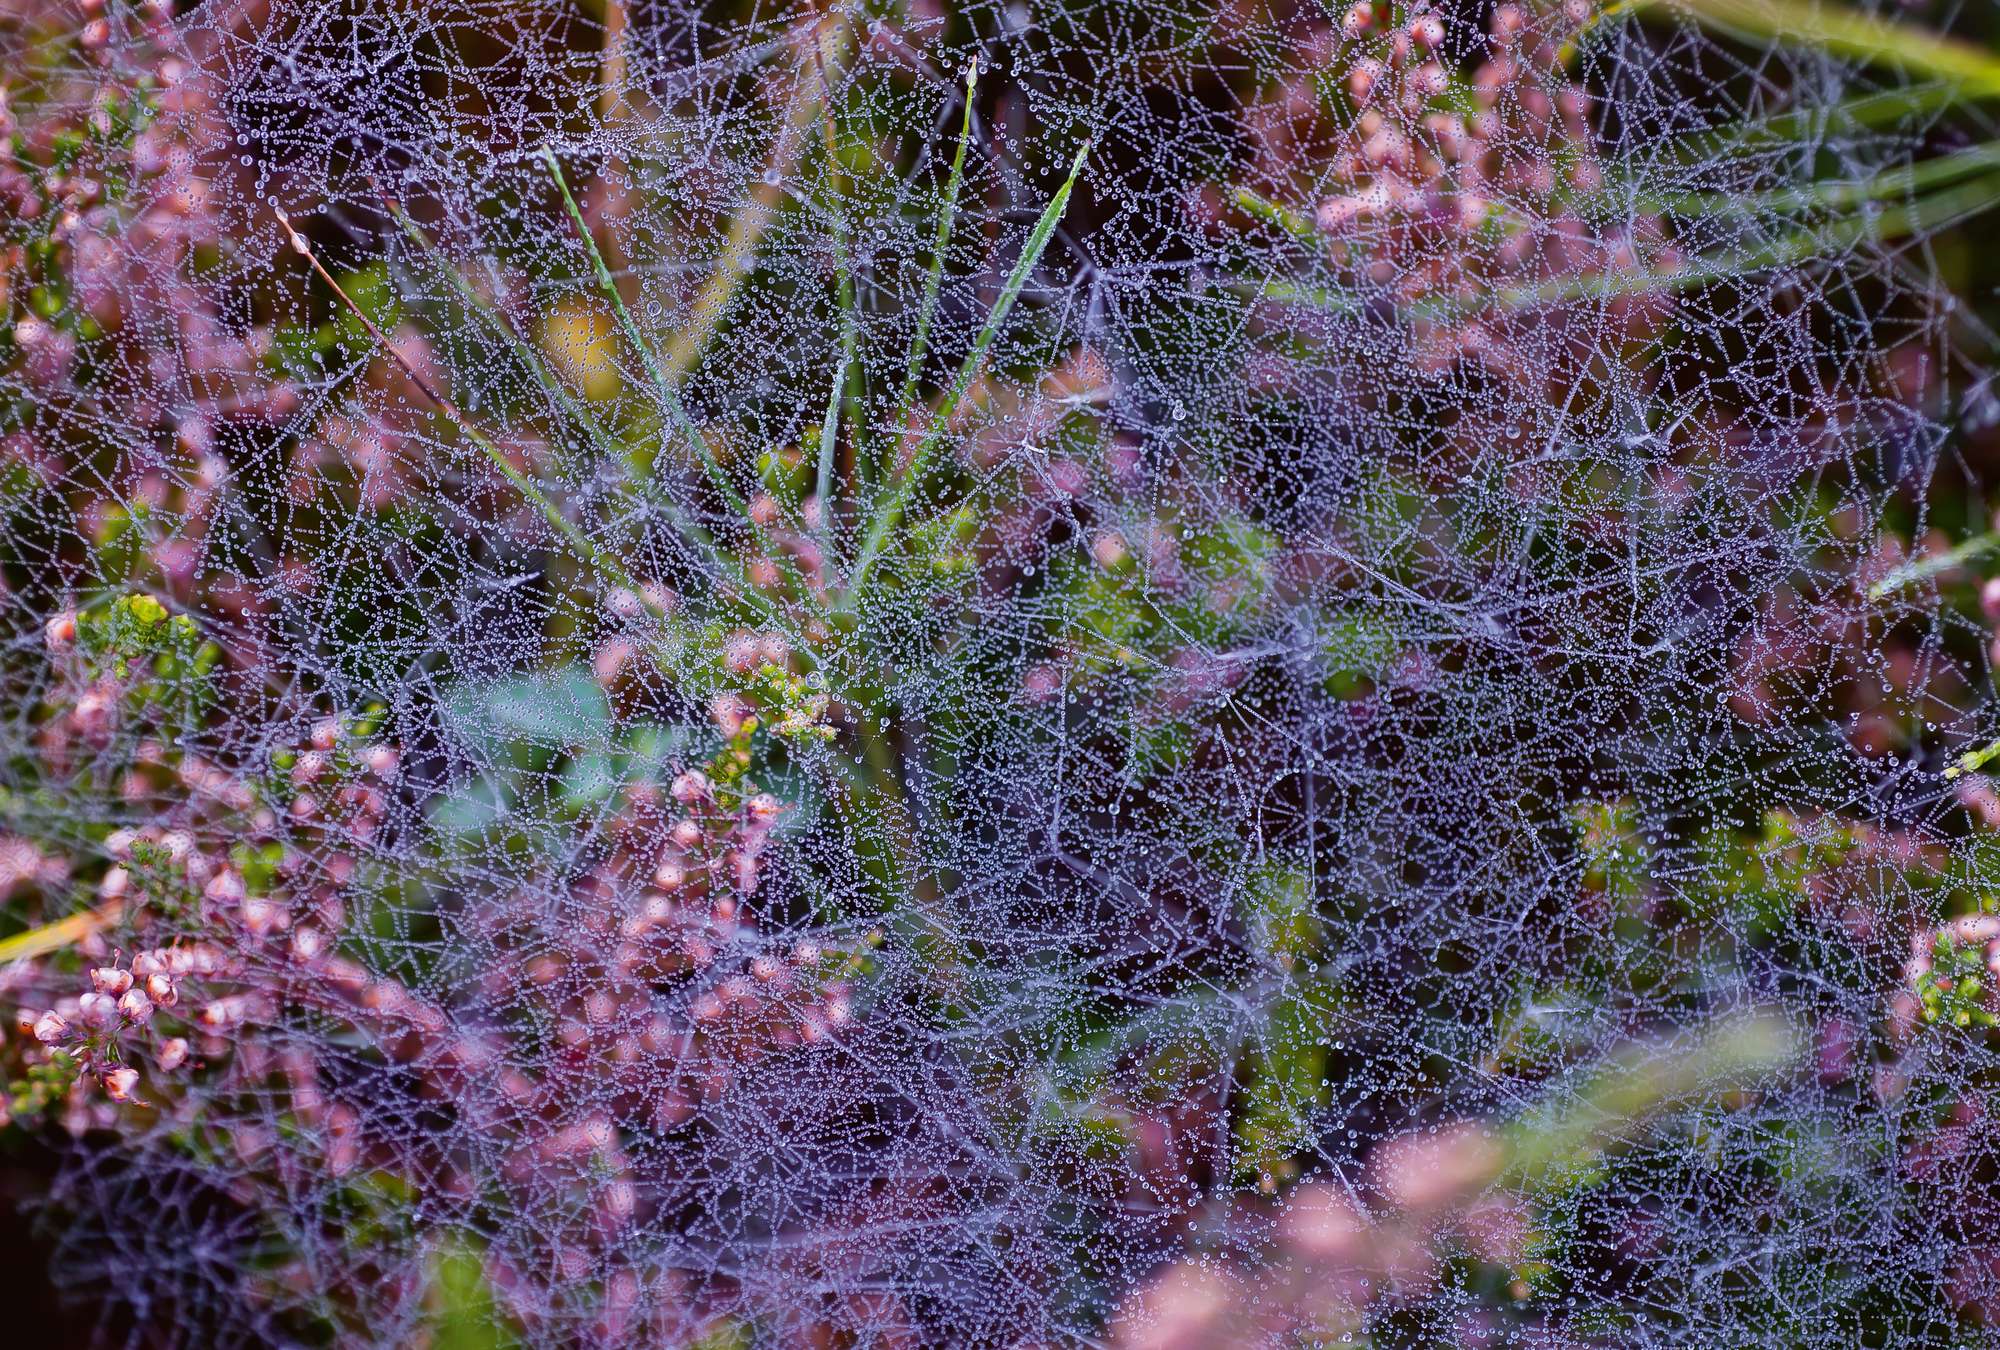             Morning dew - photo wallpaper spider web in the sunshine
        